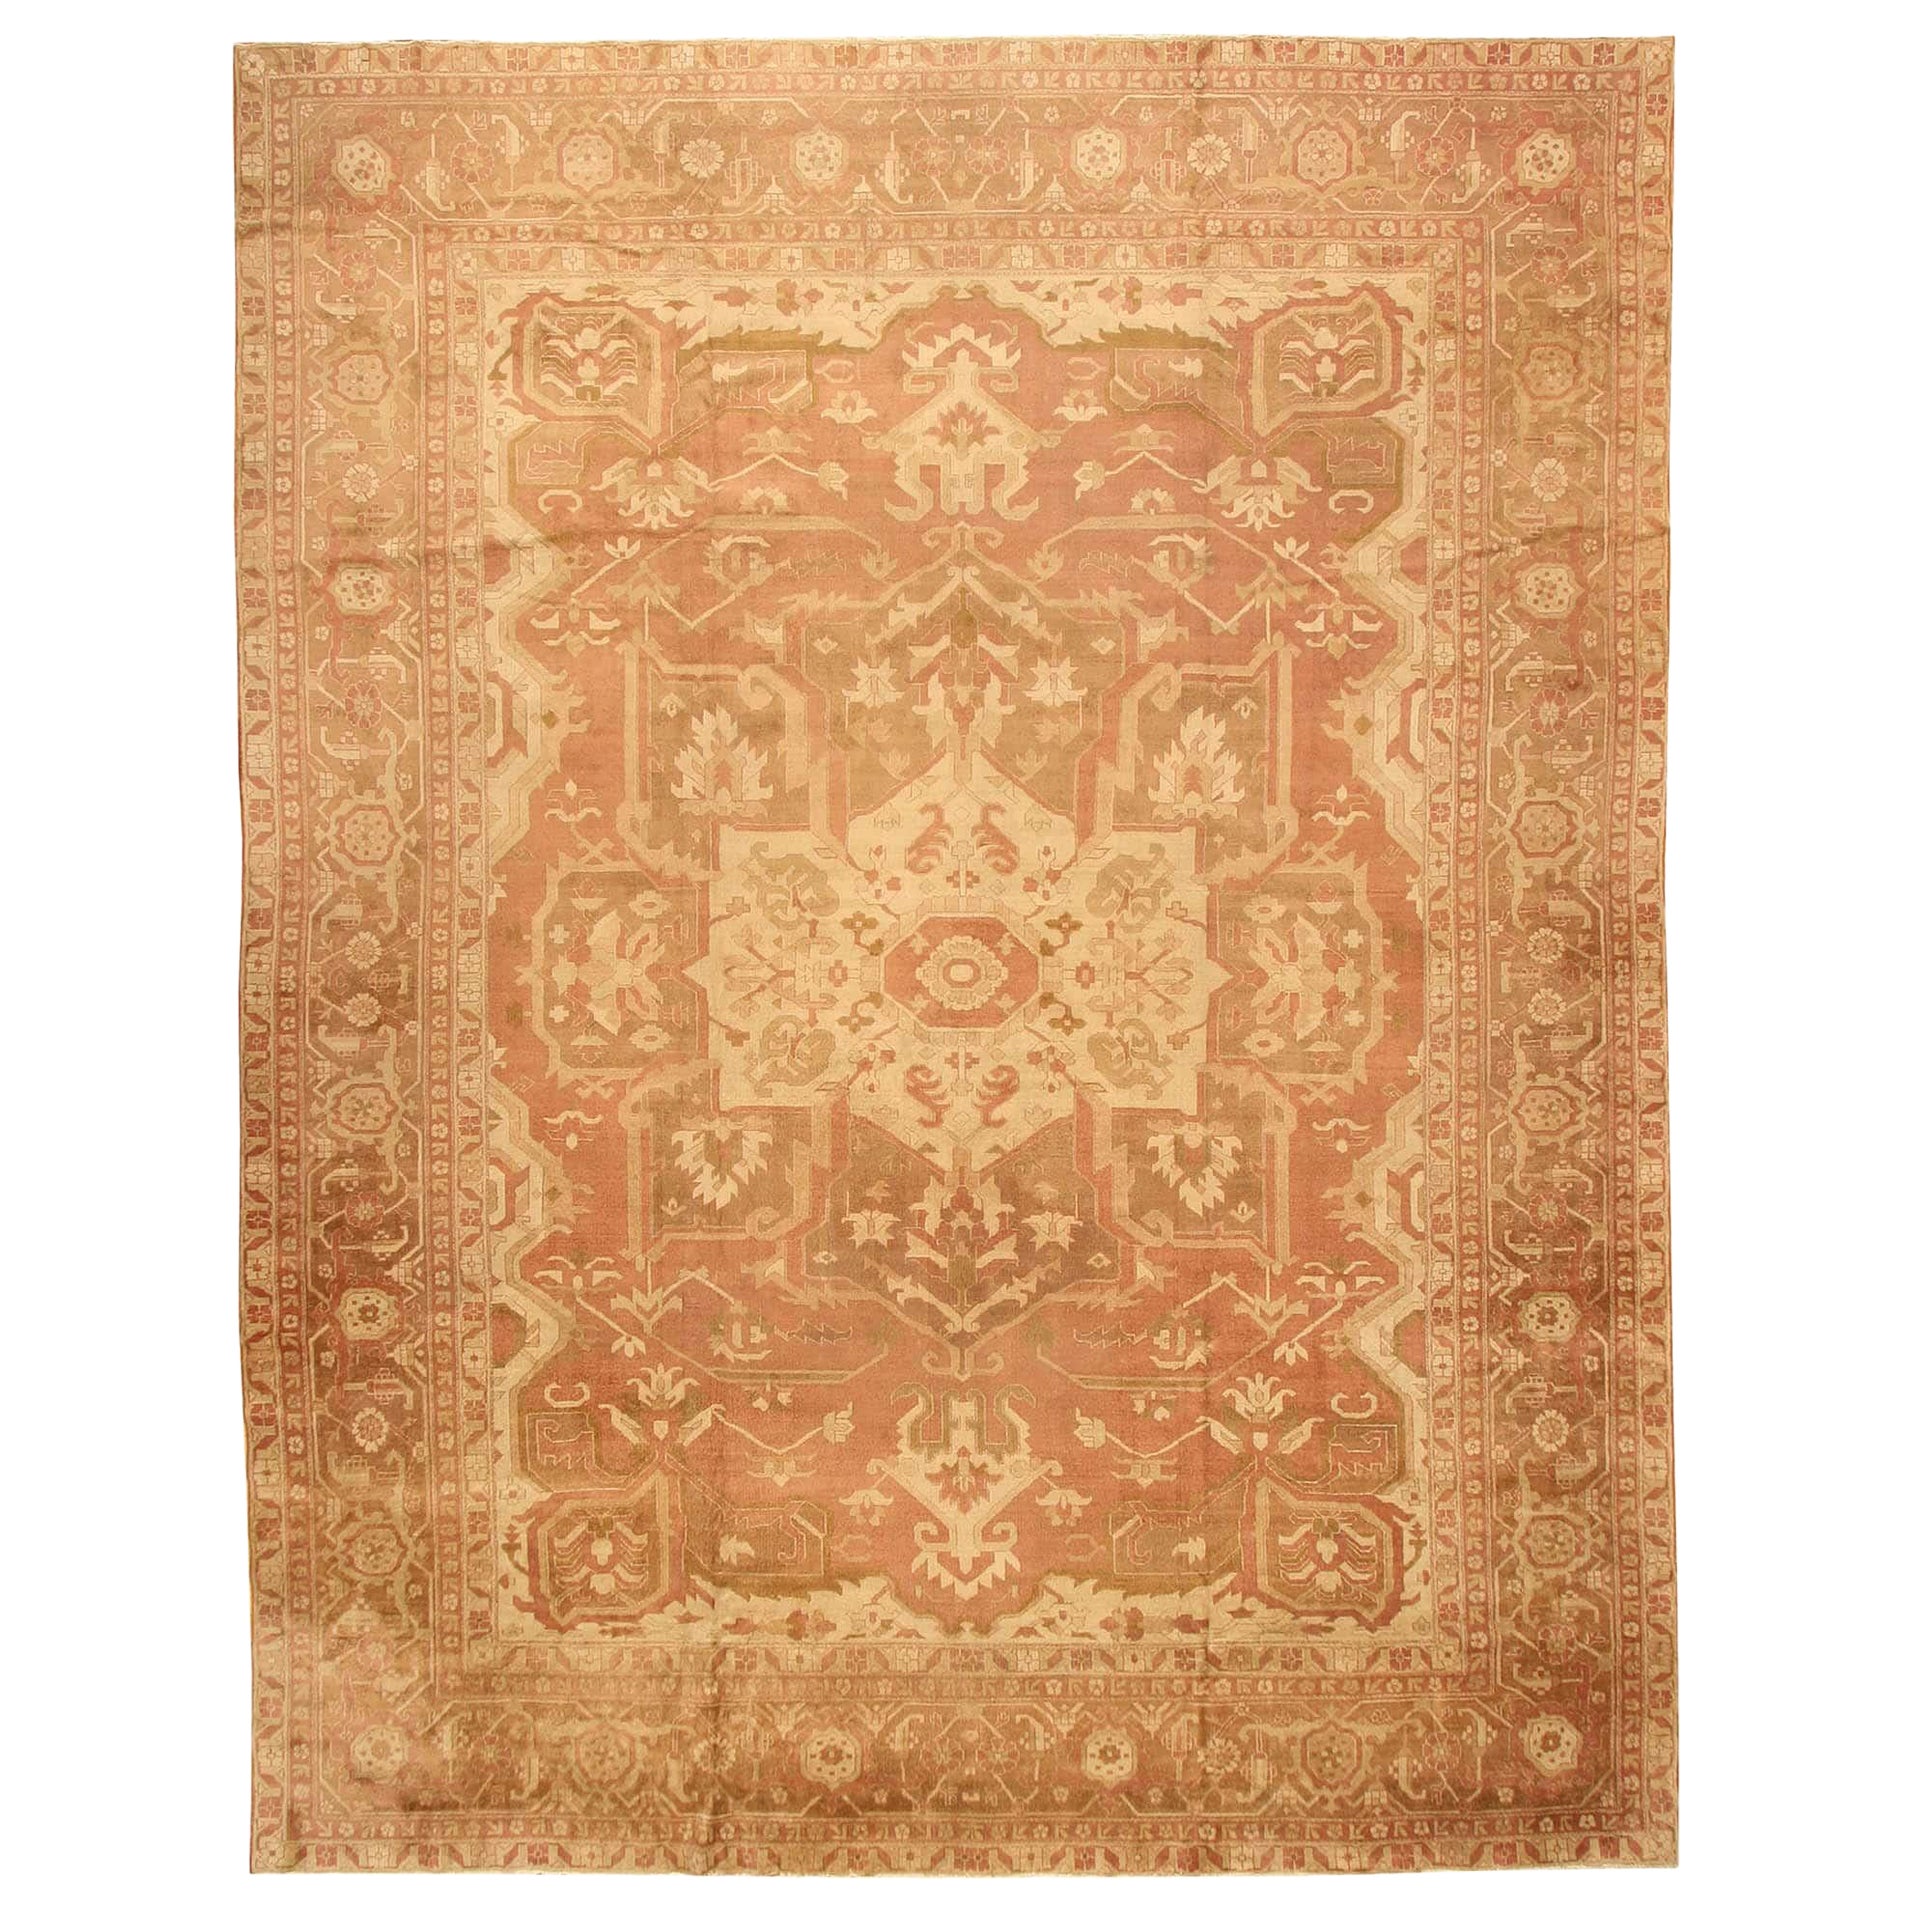 Antique Amritsar Rug. Size: 14 ft 5 in x 18 ft 8 in  For Sale